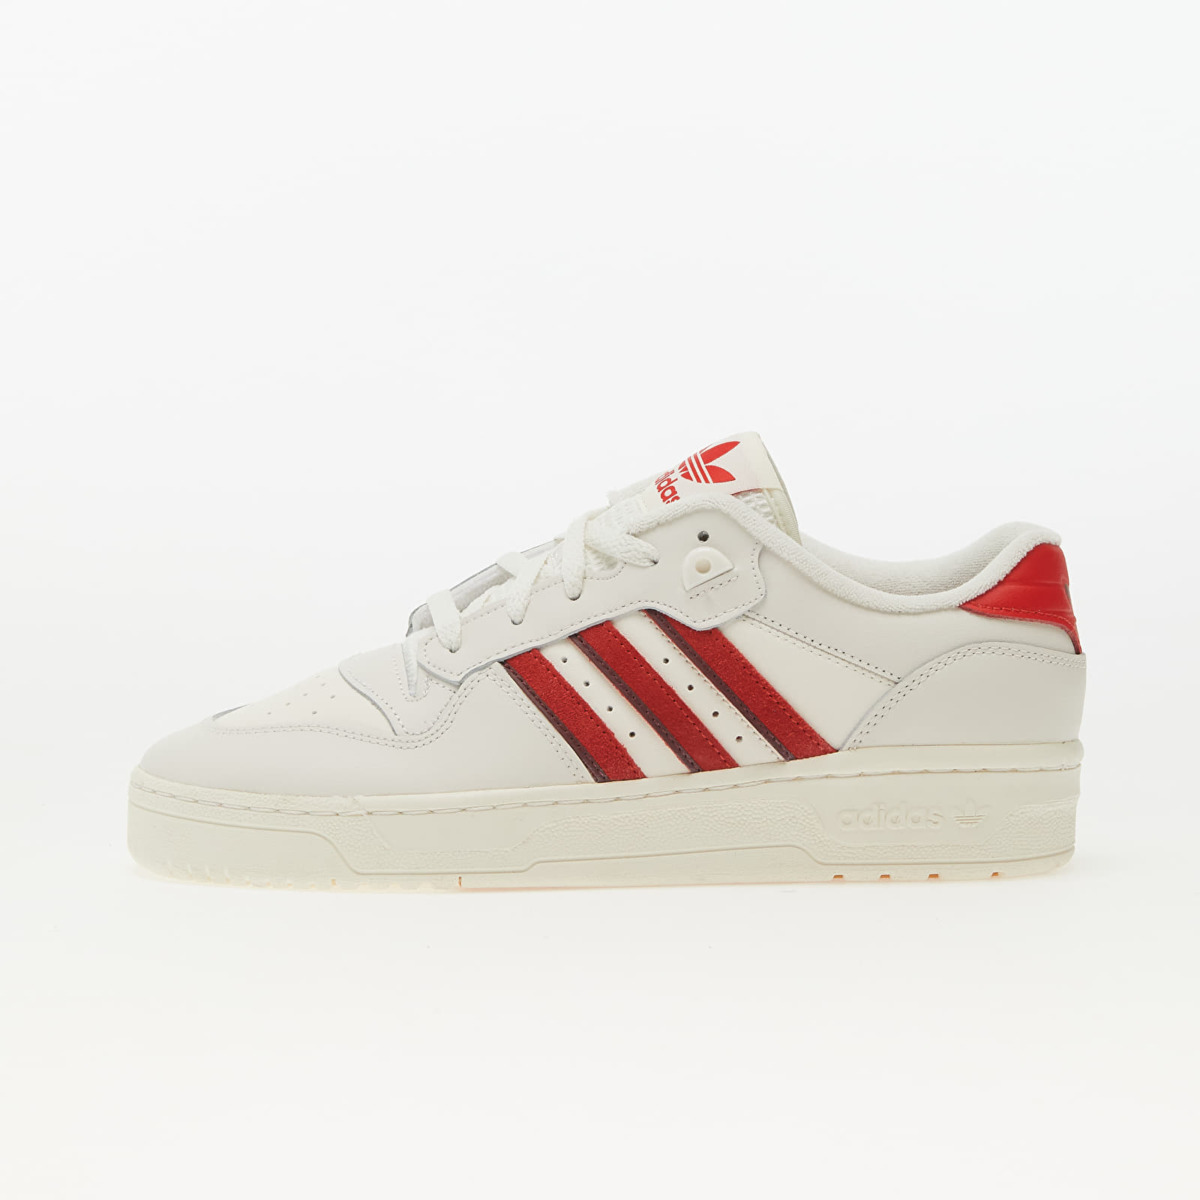 Footshop - Red Rivalry for Men from Adidas GOOFASH